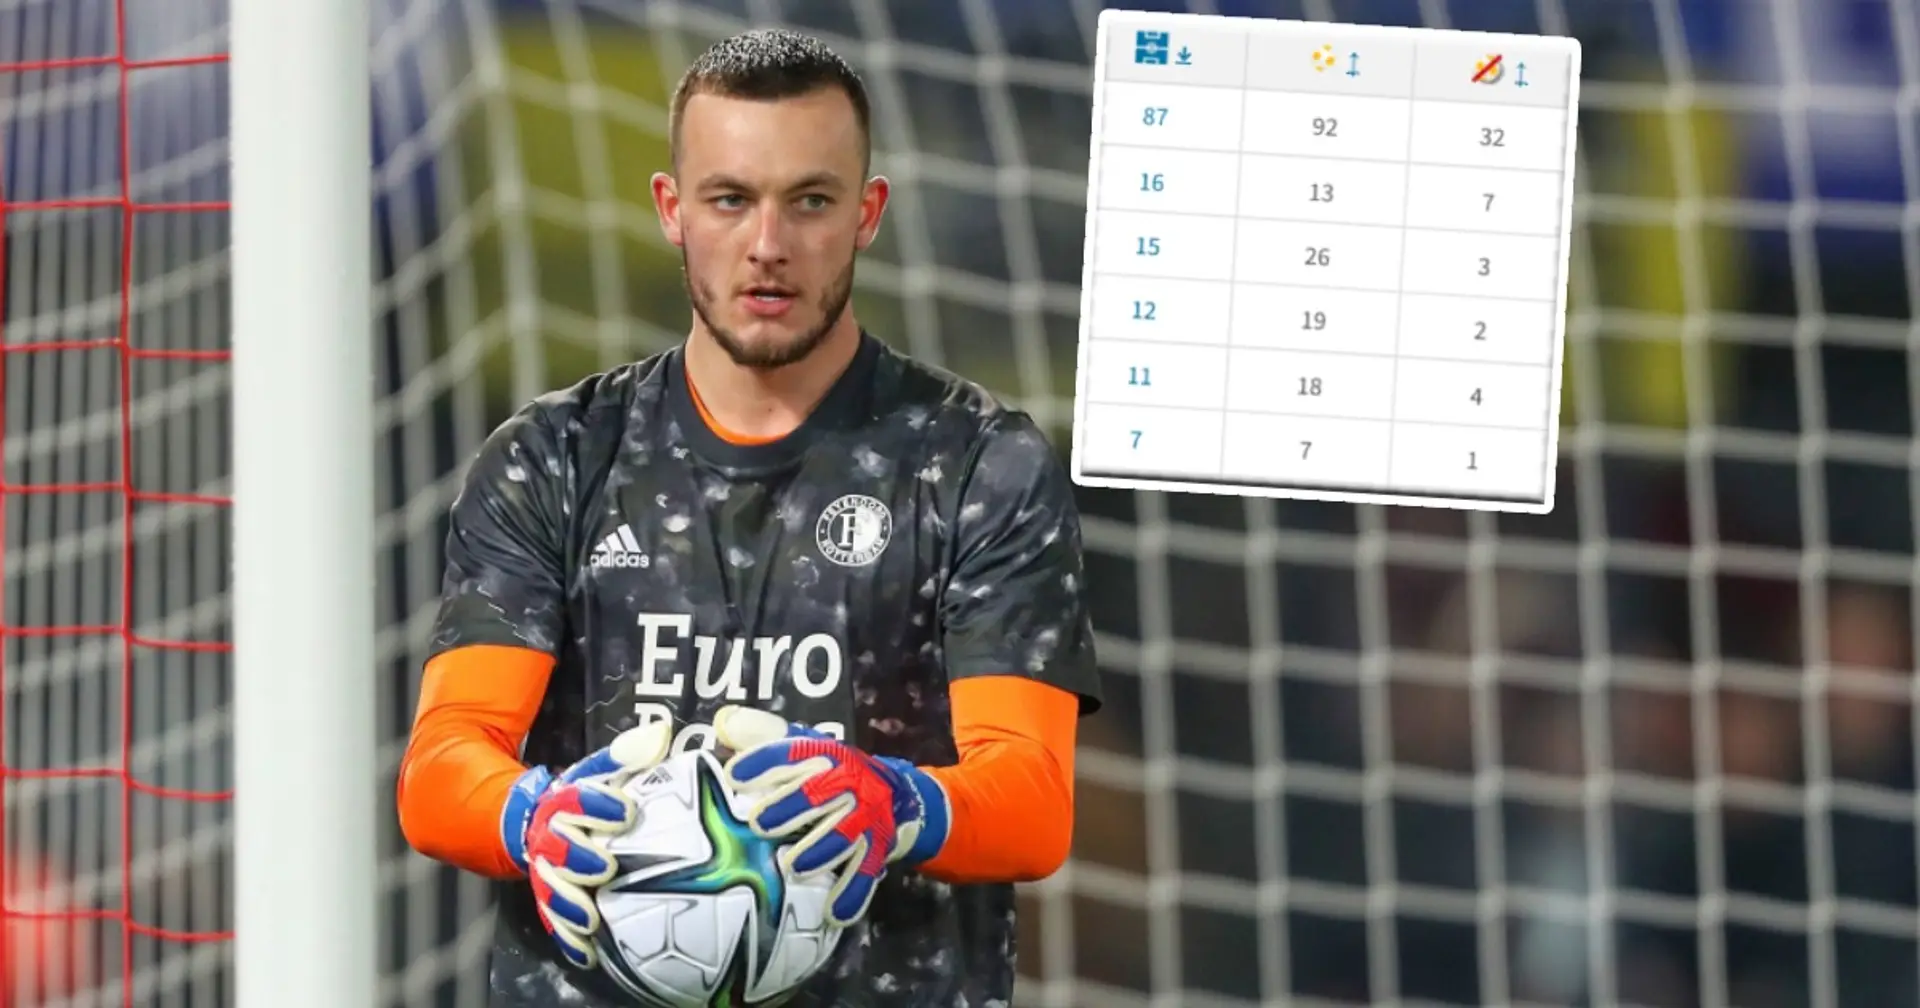 Feyenoord goalkeeper Justin Bijlow 'open' to Man United switch - his stats will amaze you